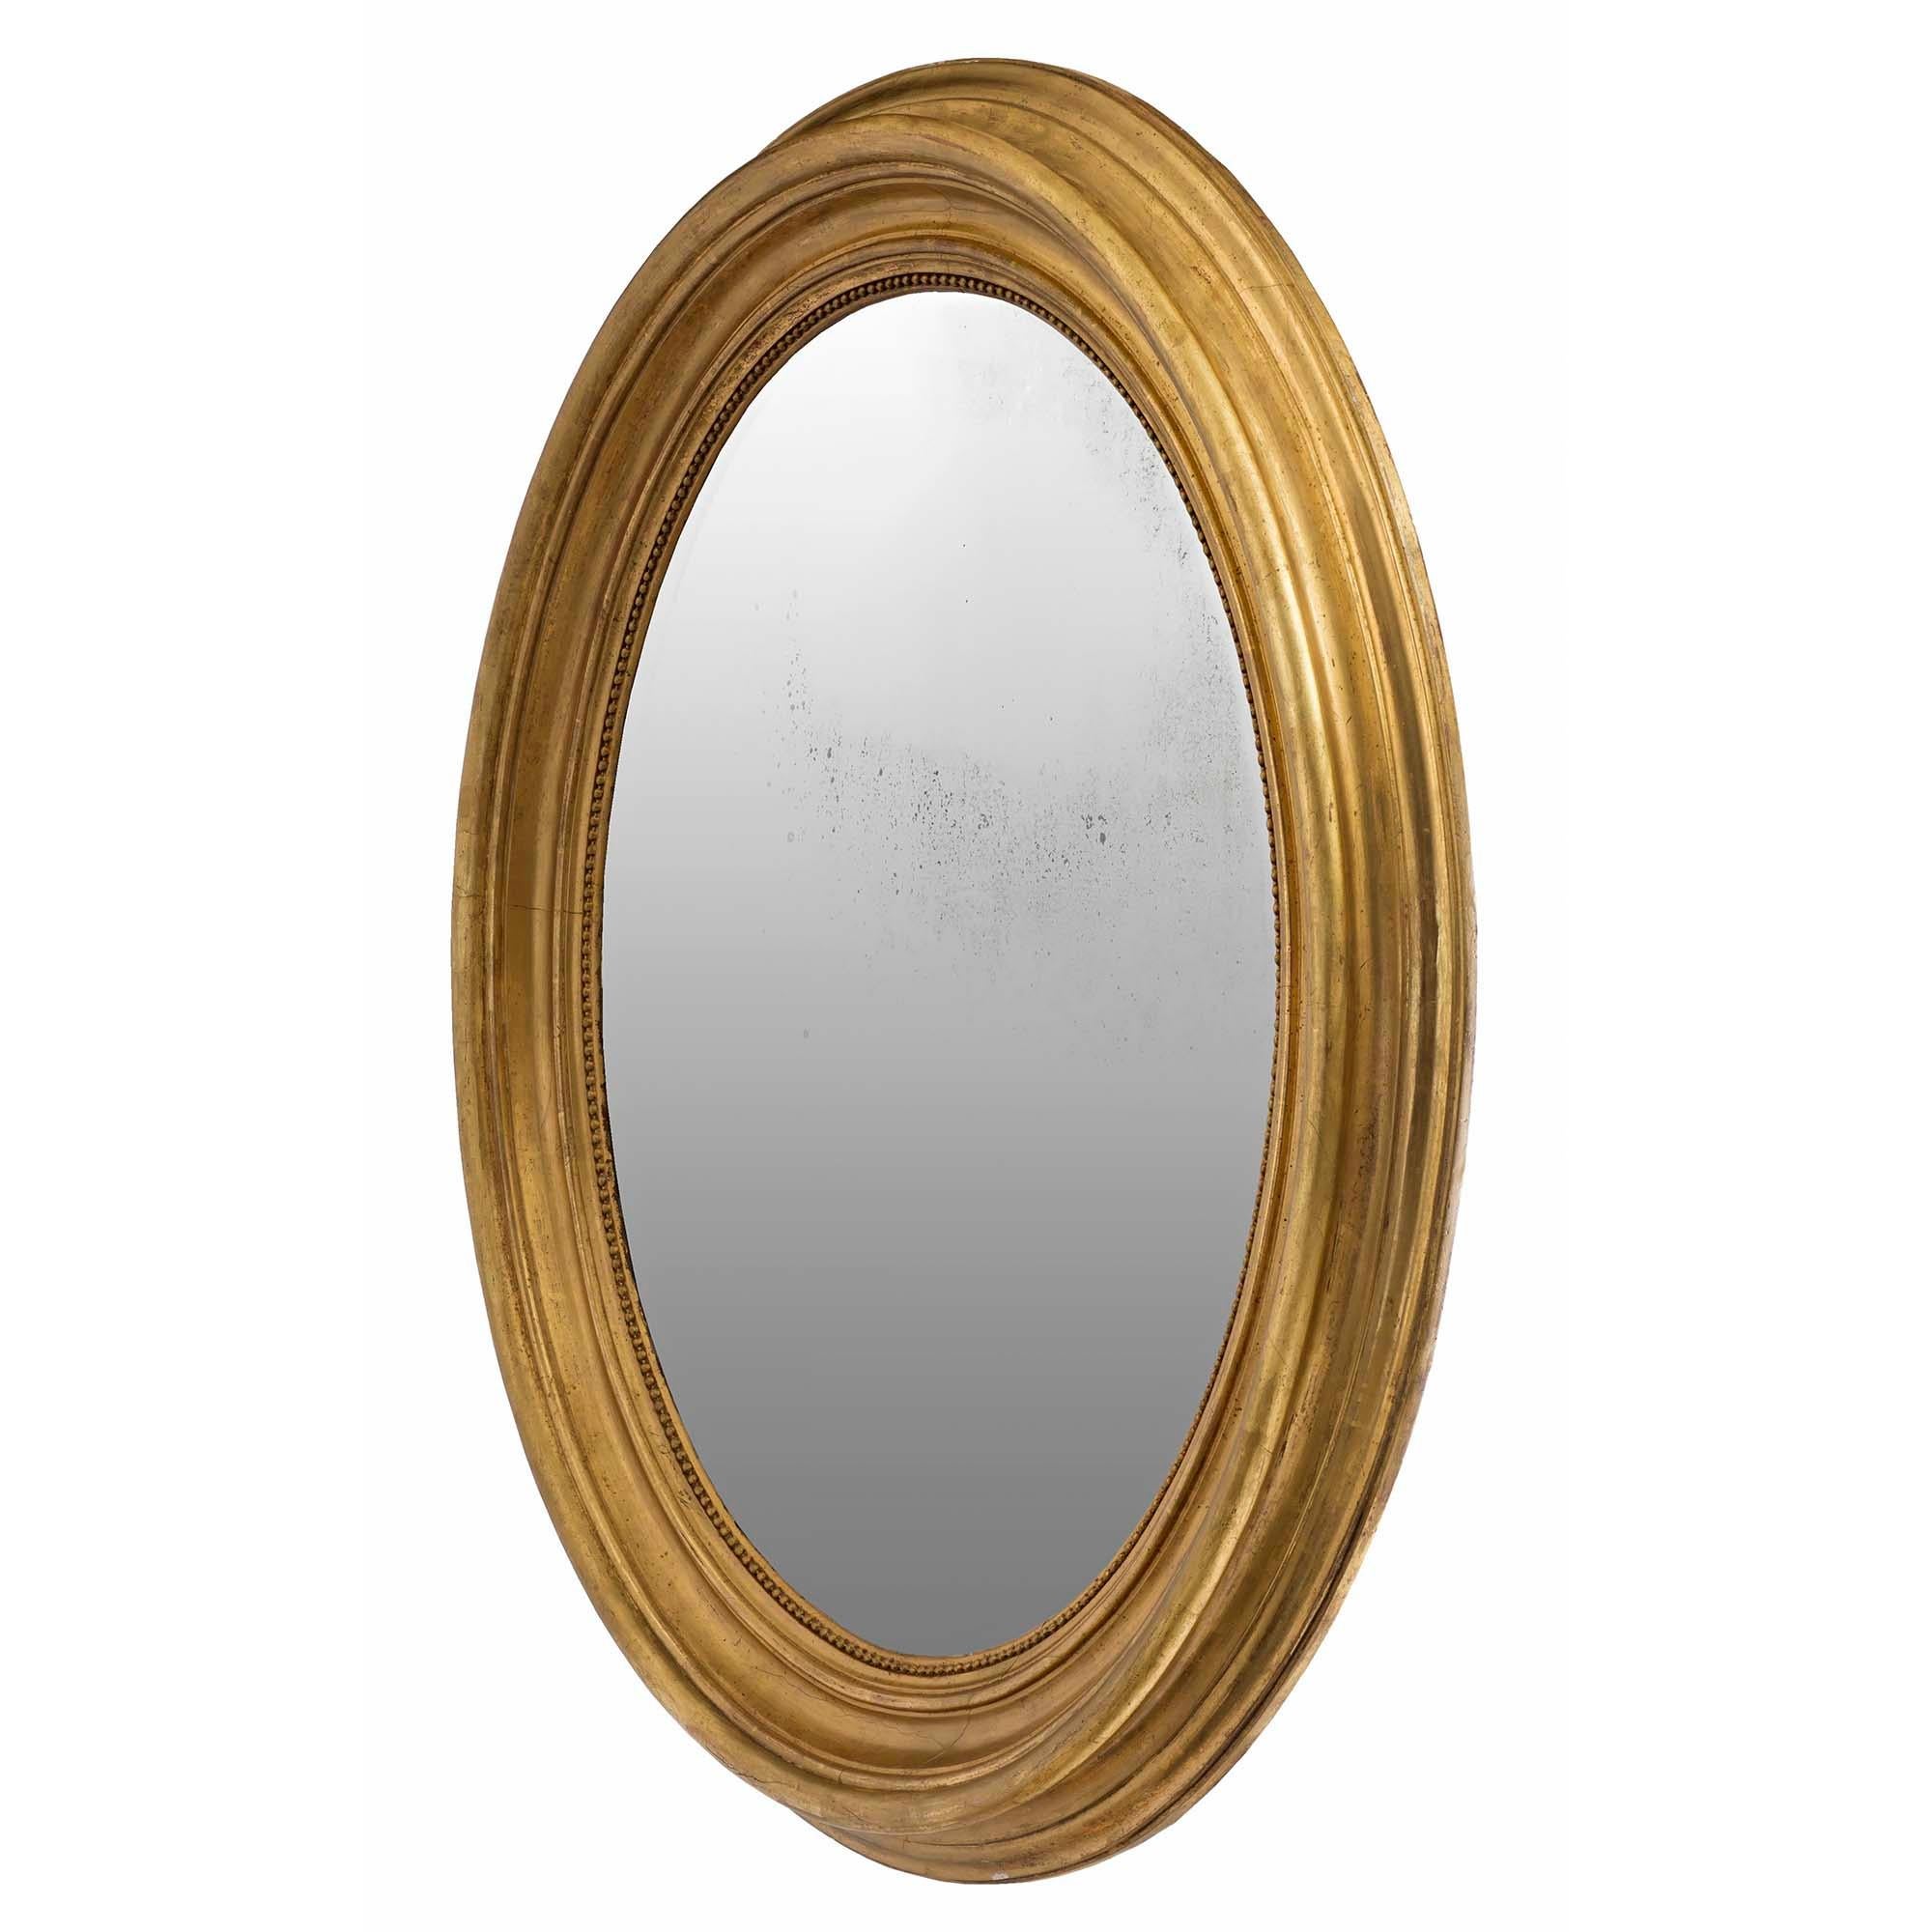 A very attractive French 19th century Louis XVI st. giltwood oval mirror. The original mirror plate is fitted within a satin and burnished giltwood frame. The impressive mottled frame has a beaded interior border. The mirror may be displayed